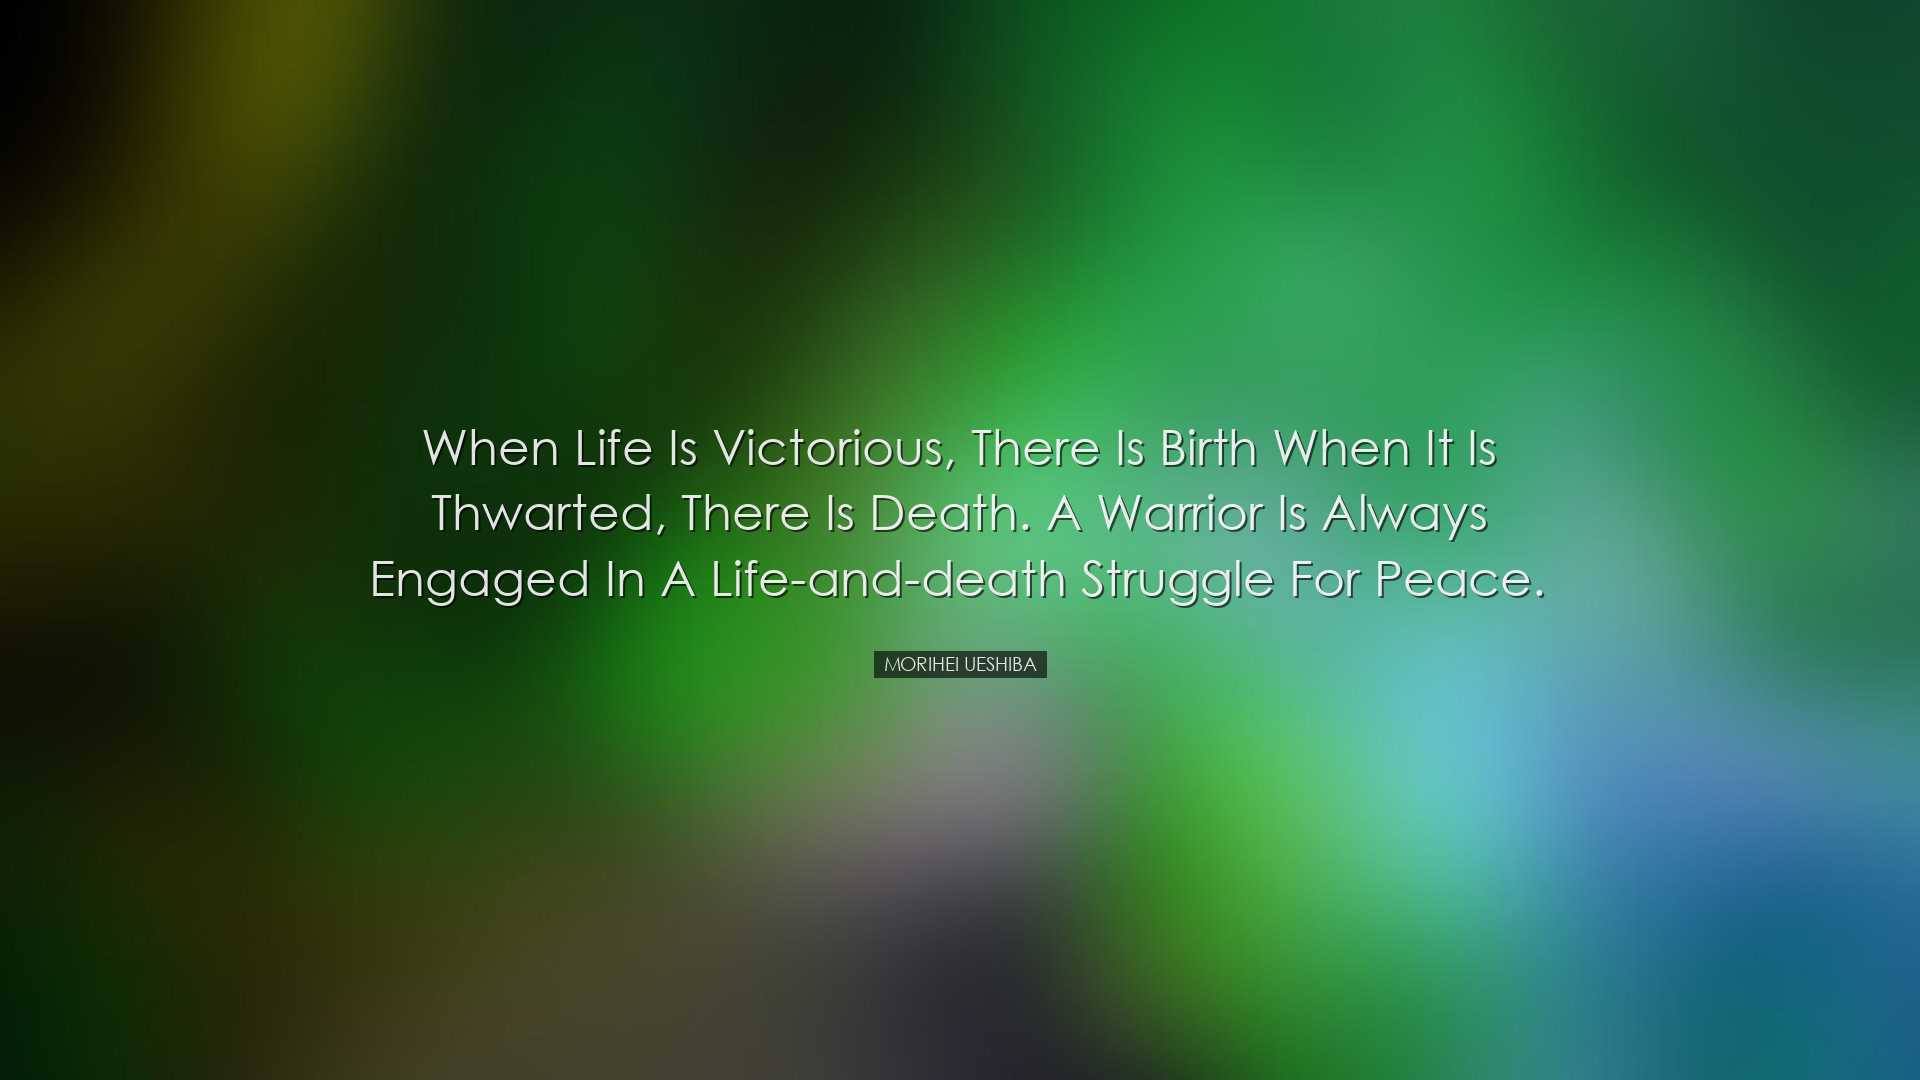 When life is victorious, there is birth when it is thwarted, there